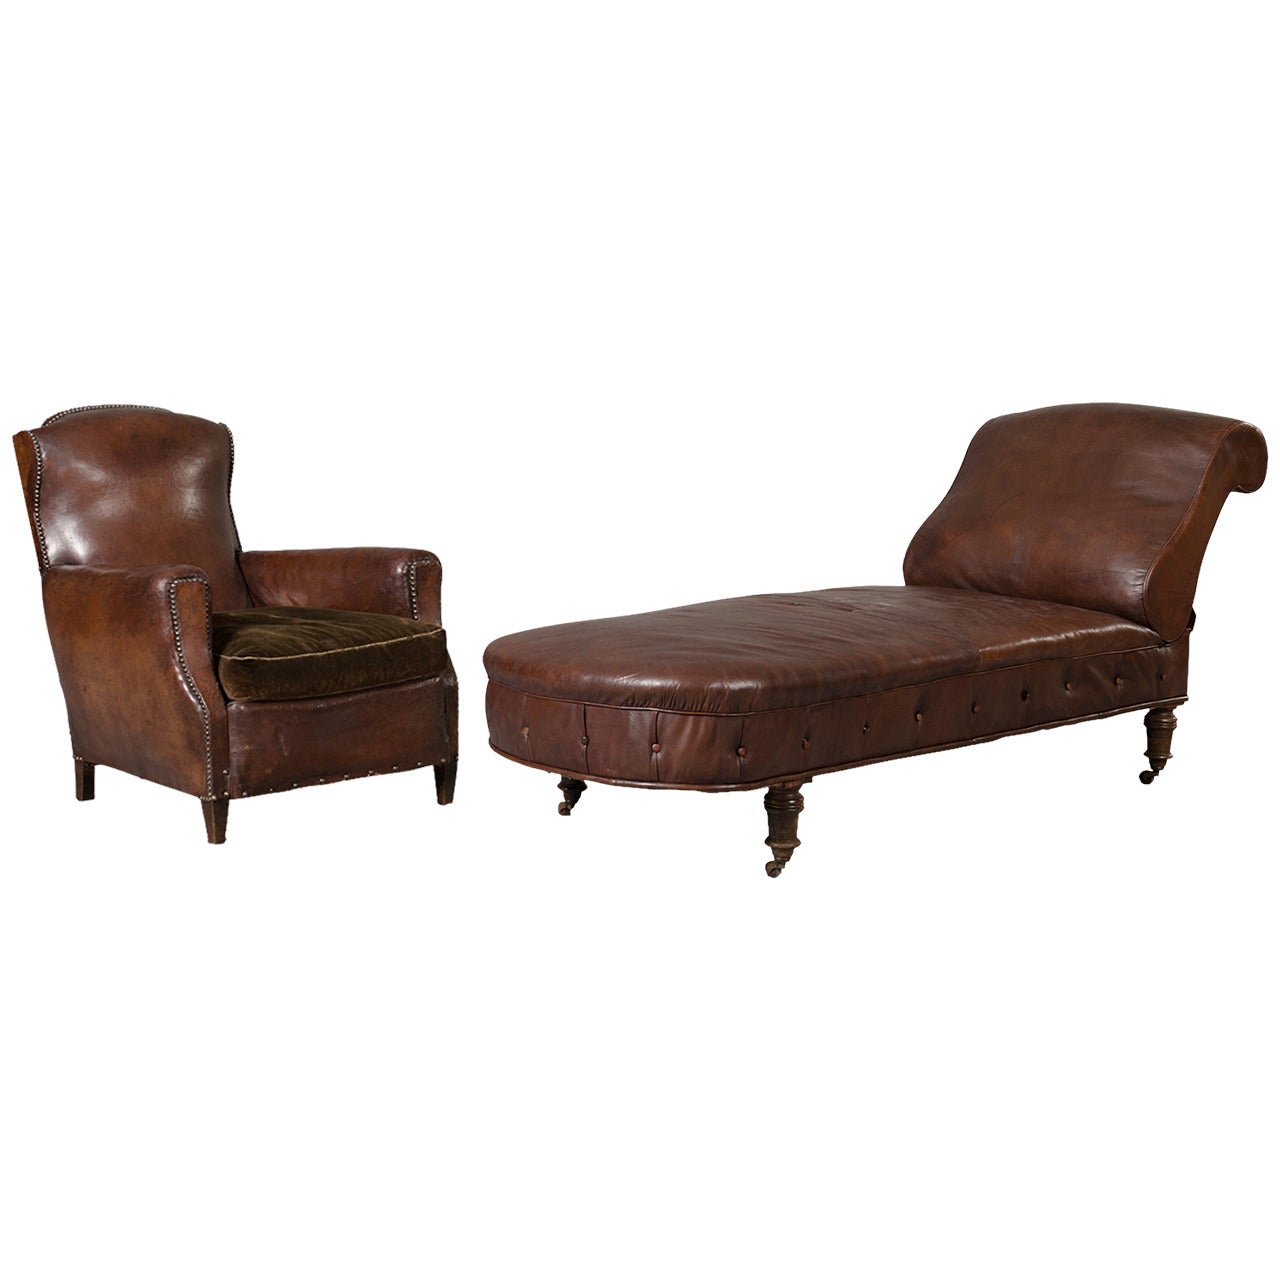 Leather Armchair and Sofa Set from 1930s Psychoanalyst